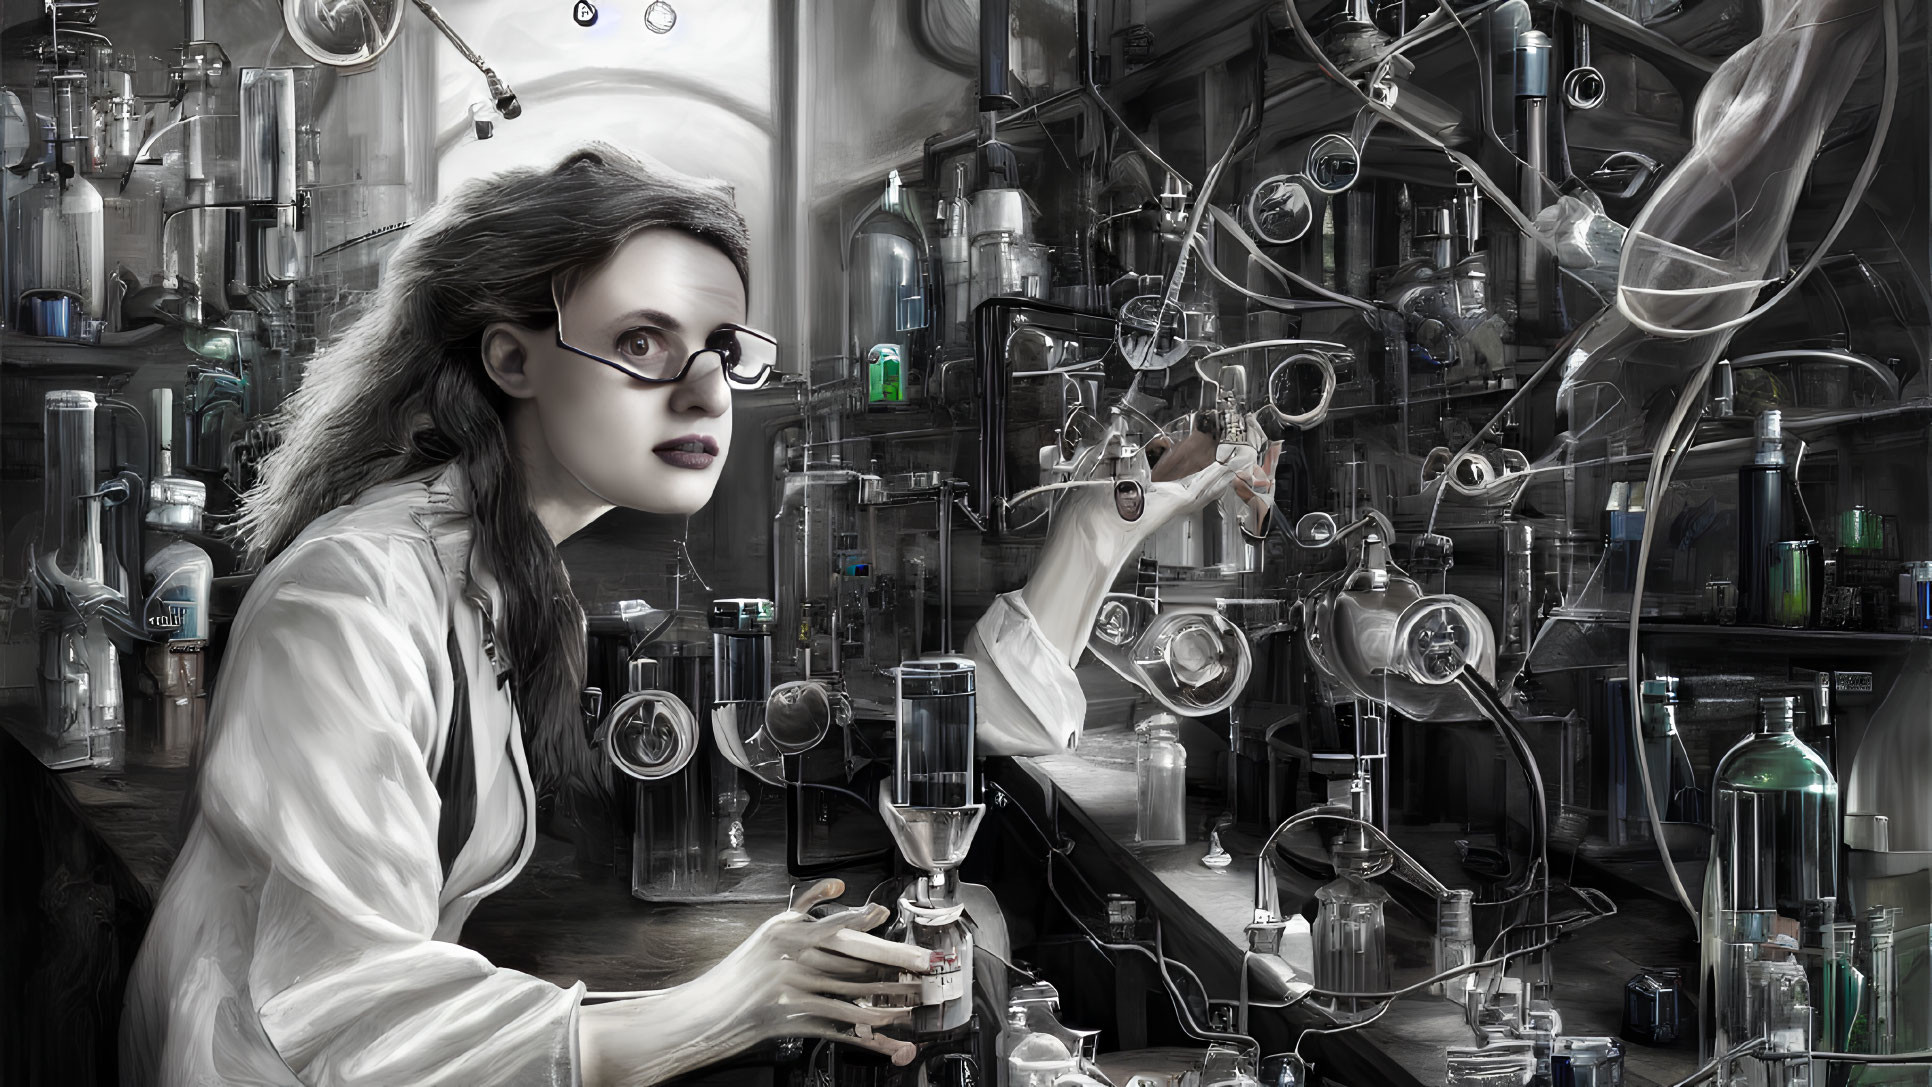 Scientist in lab coat examines chemical flask in cluttered laboratory